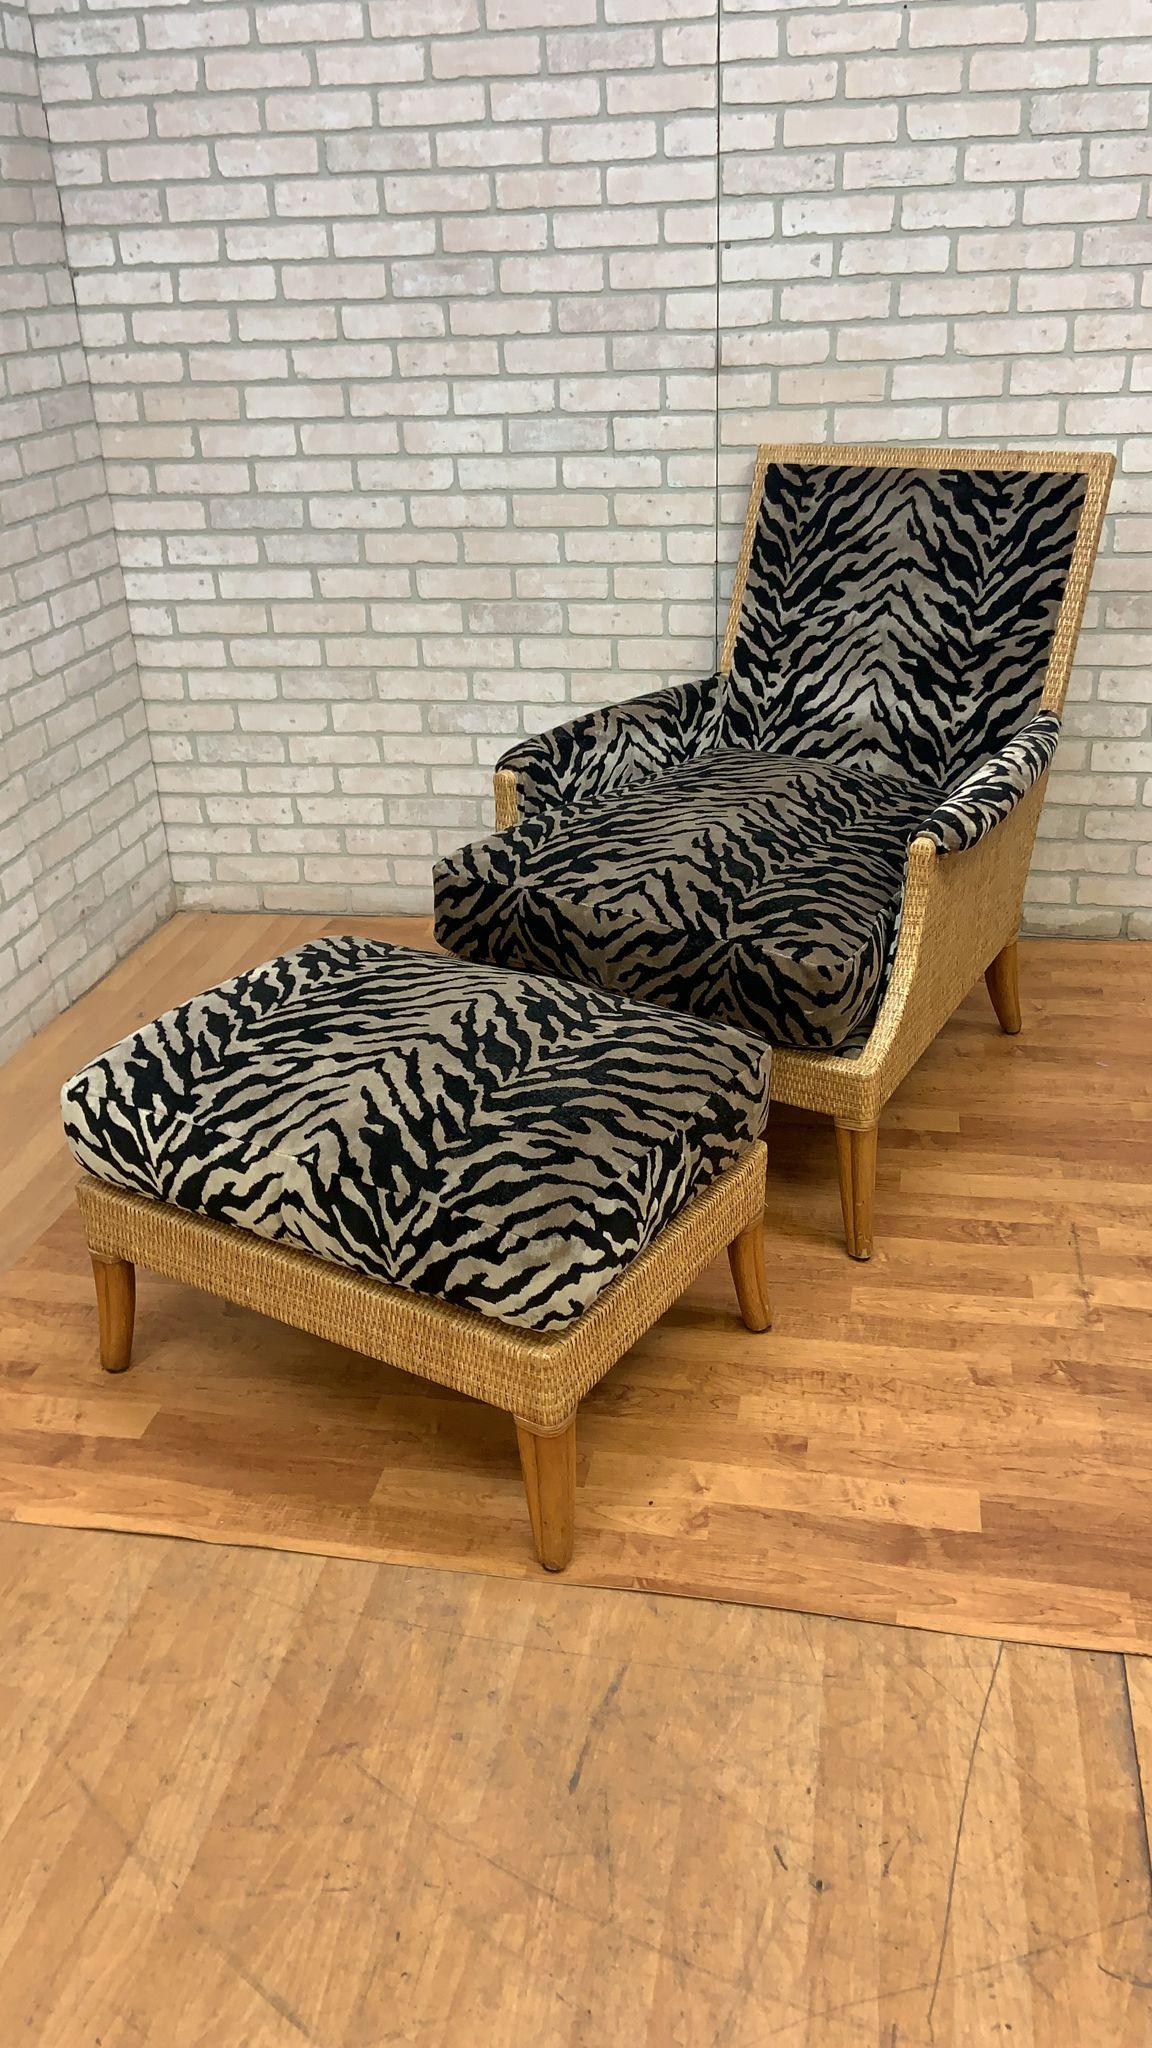 Hand-Crafted Vintage McGuire Rattan and Wicker Umbria Lounge Chair with Ottoman, 2 Piece Set For Sale